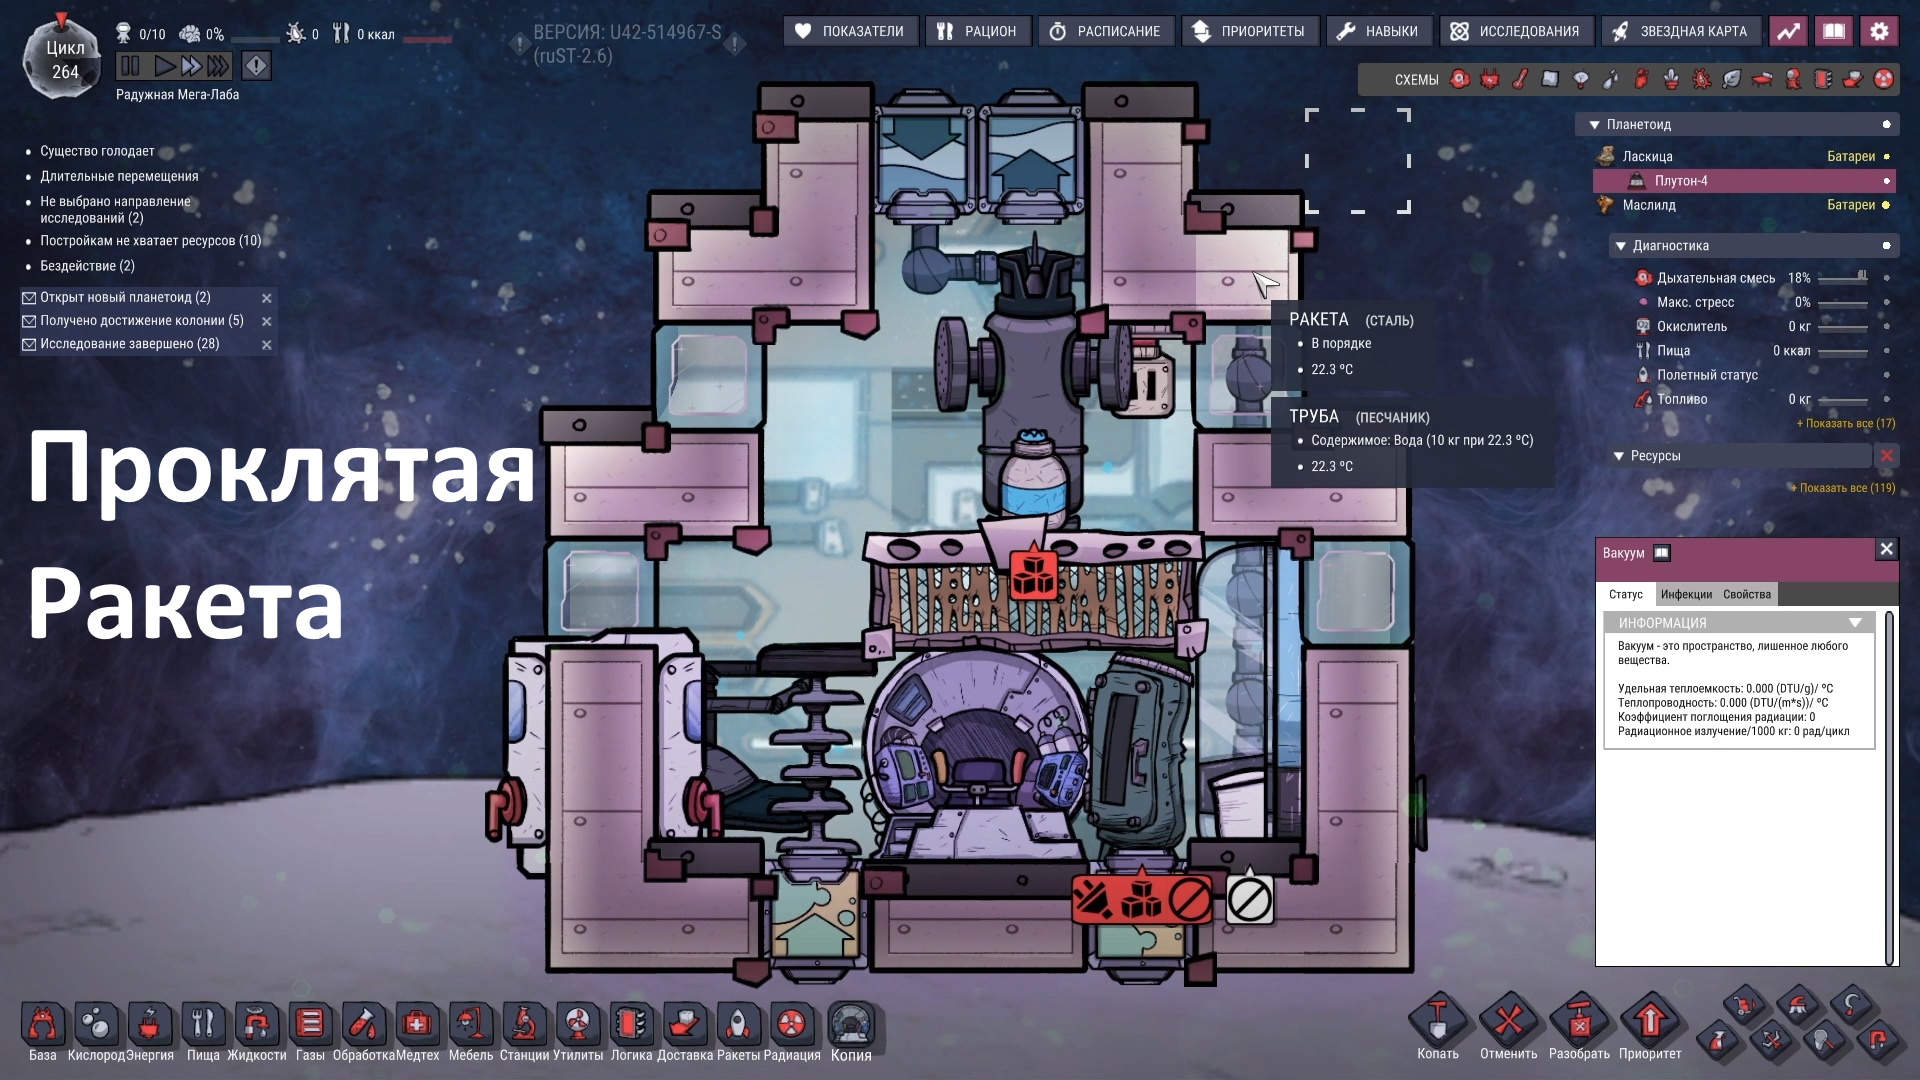 Oxygen not included Spaced out ракета